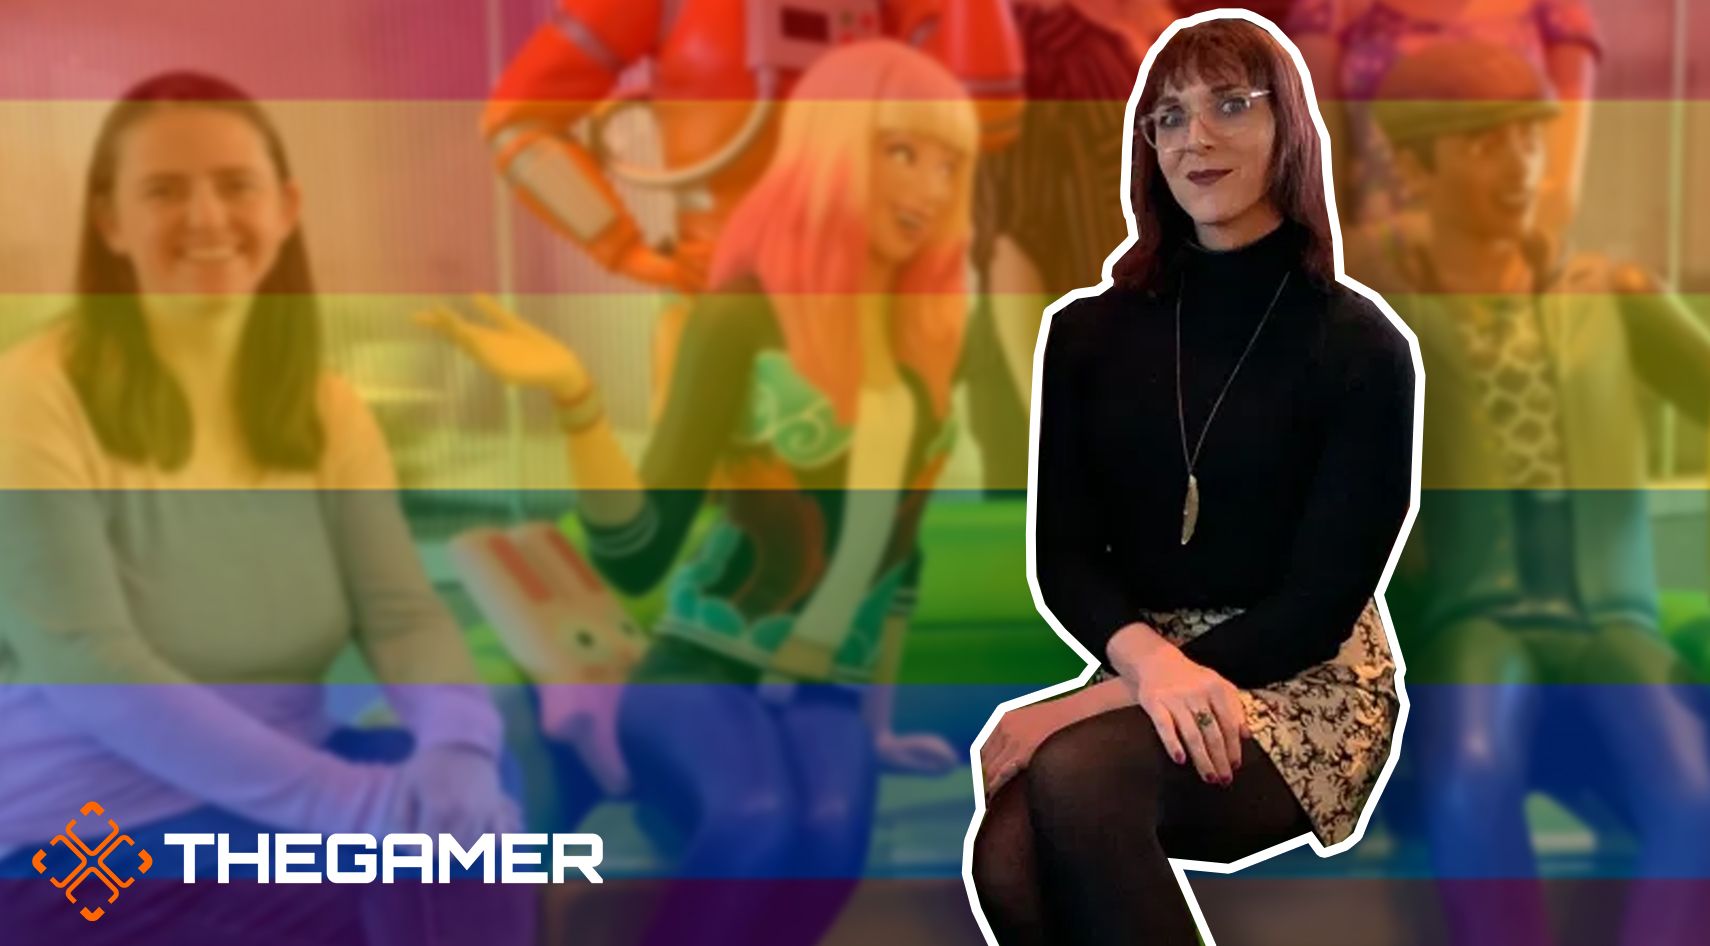 Developer Chloe Carter Says The Sims 4 Is All About Letting People “See And Be Themselves”